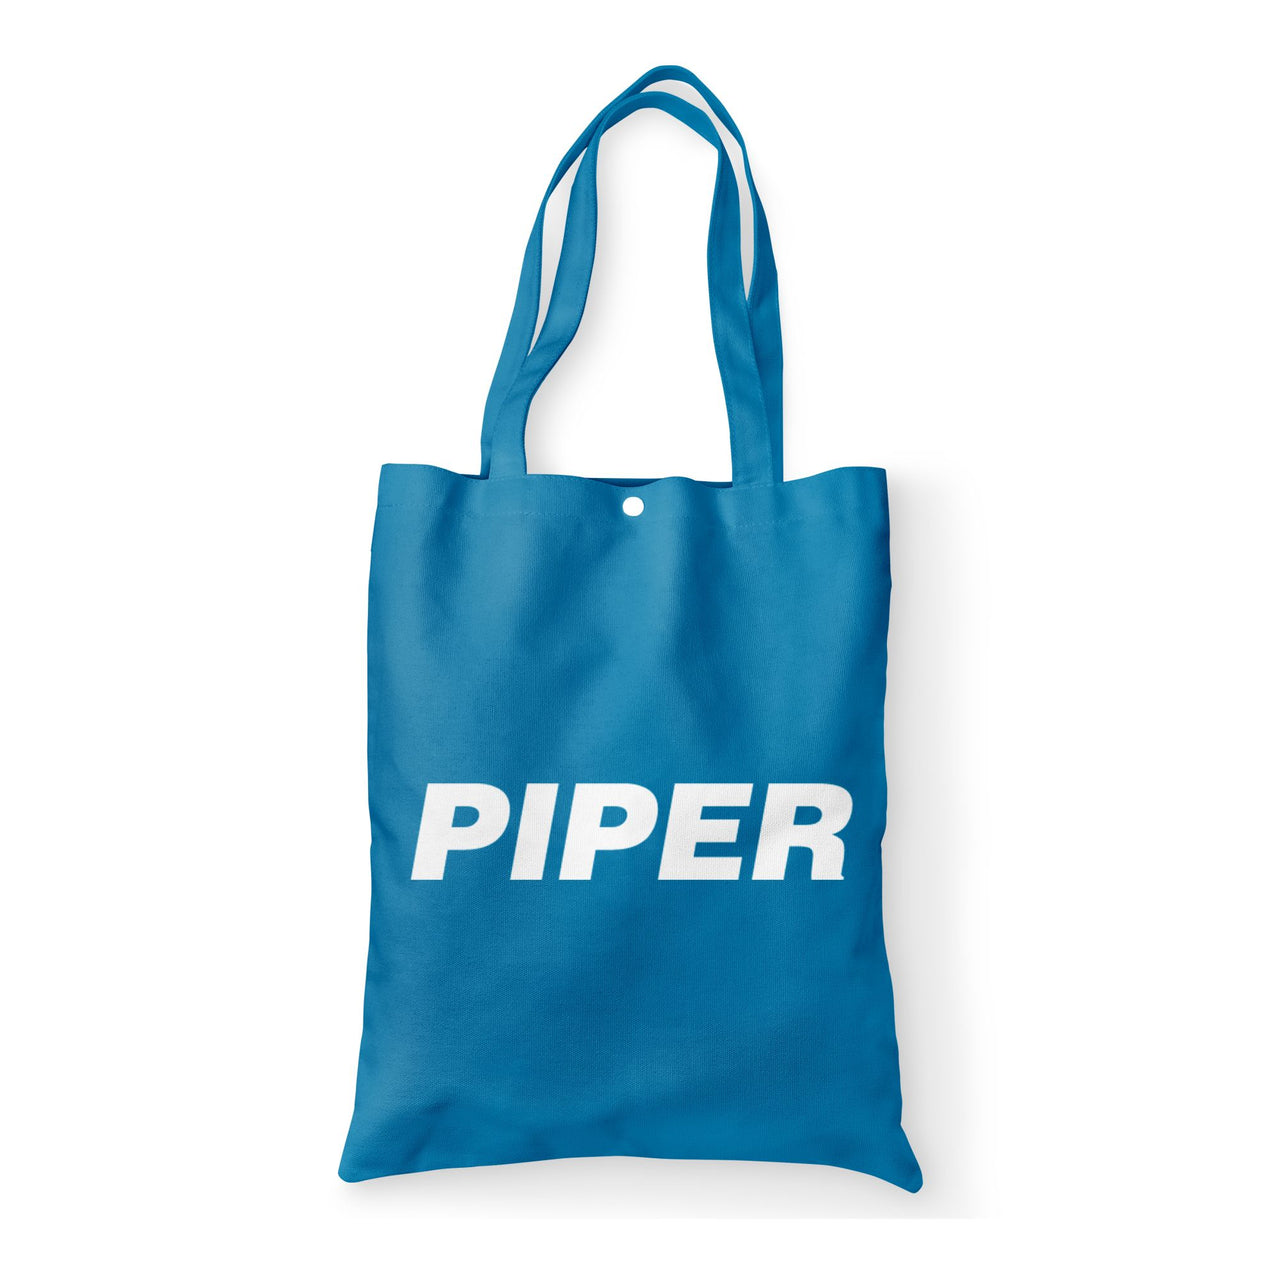 Piper & Text Designed Tote Bags